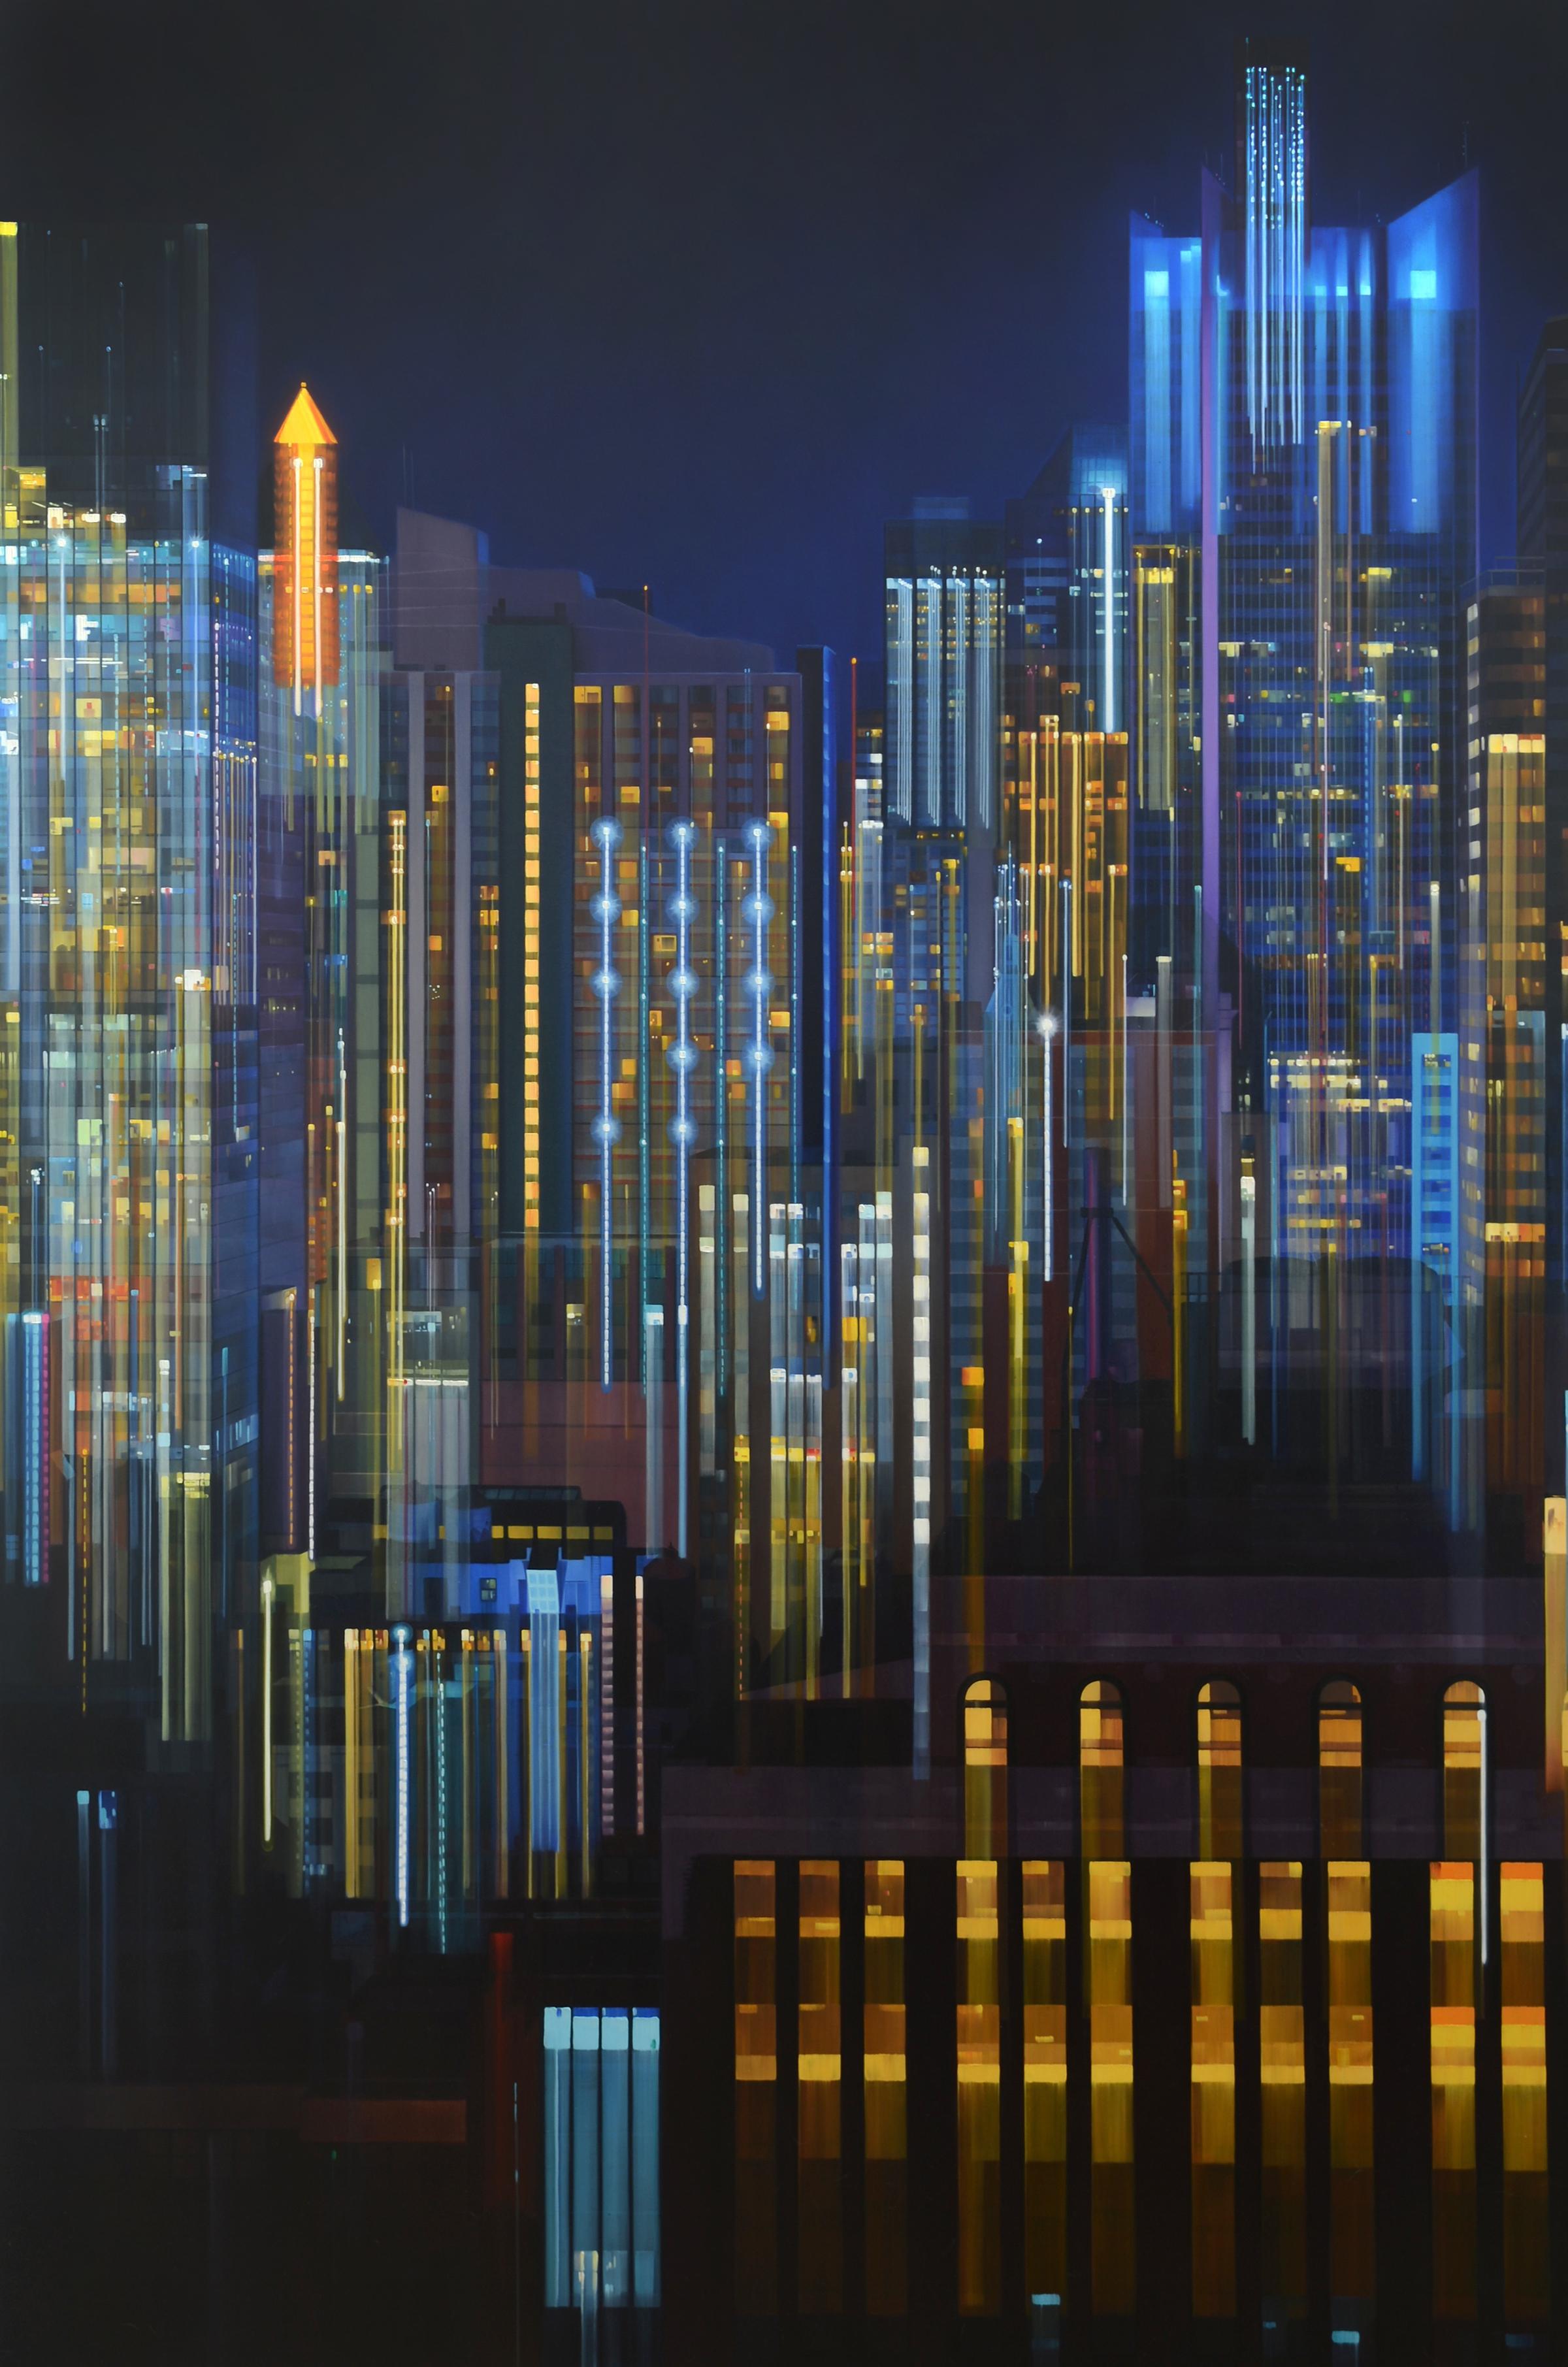 Alexandra Pacula Landscape Painting - ASCENDING GLOW, city at night, cityscape, vibrant colors, NYC